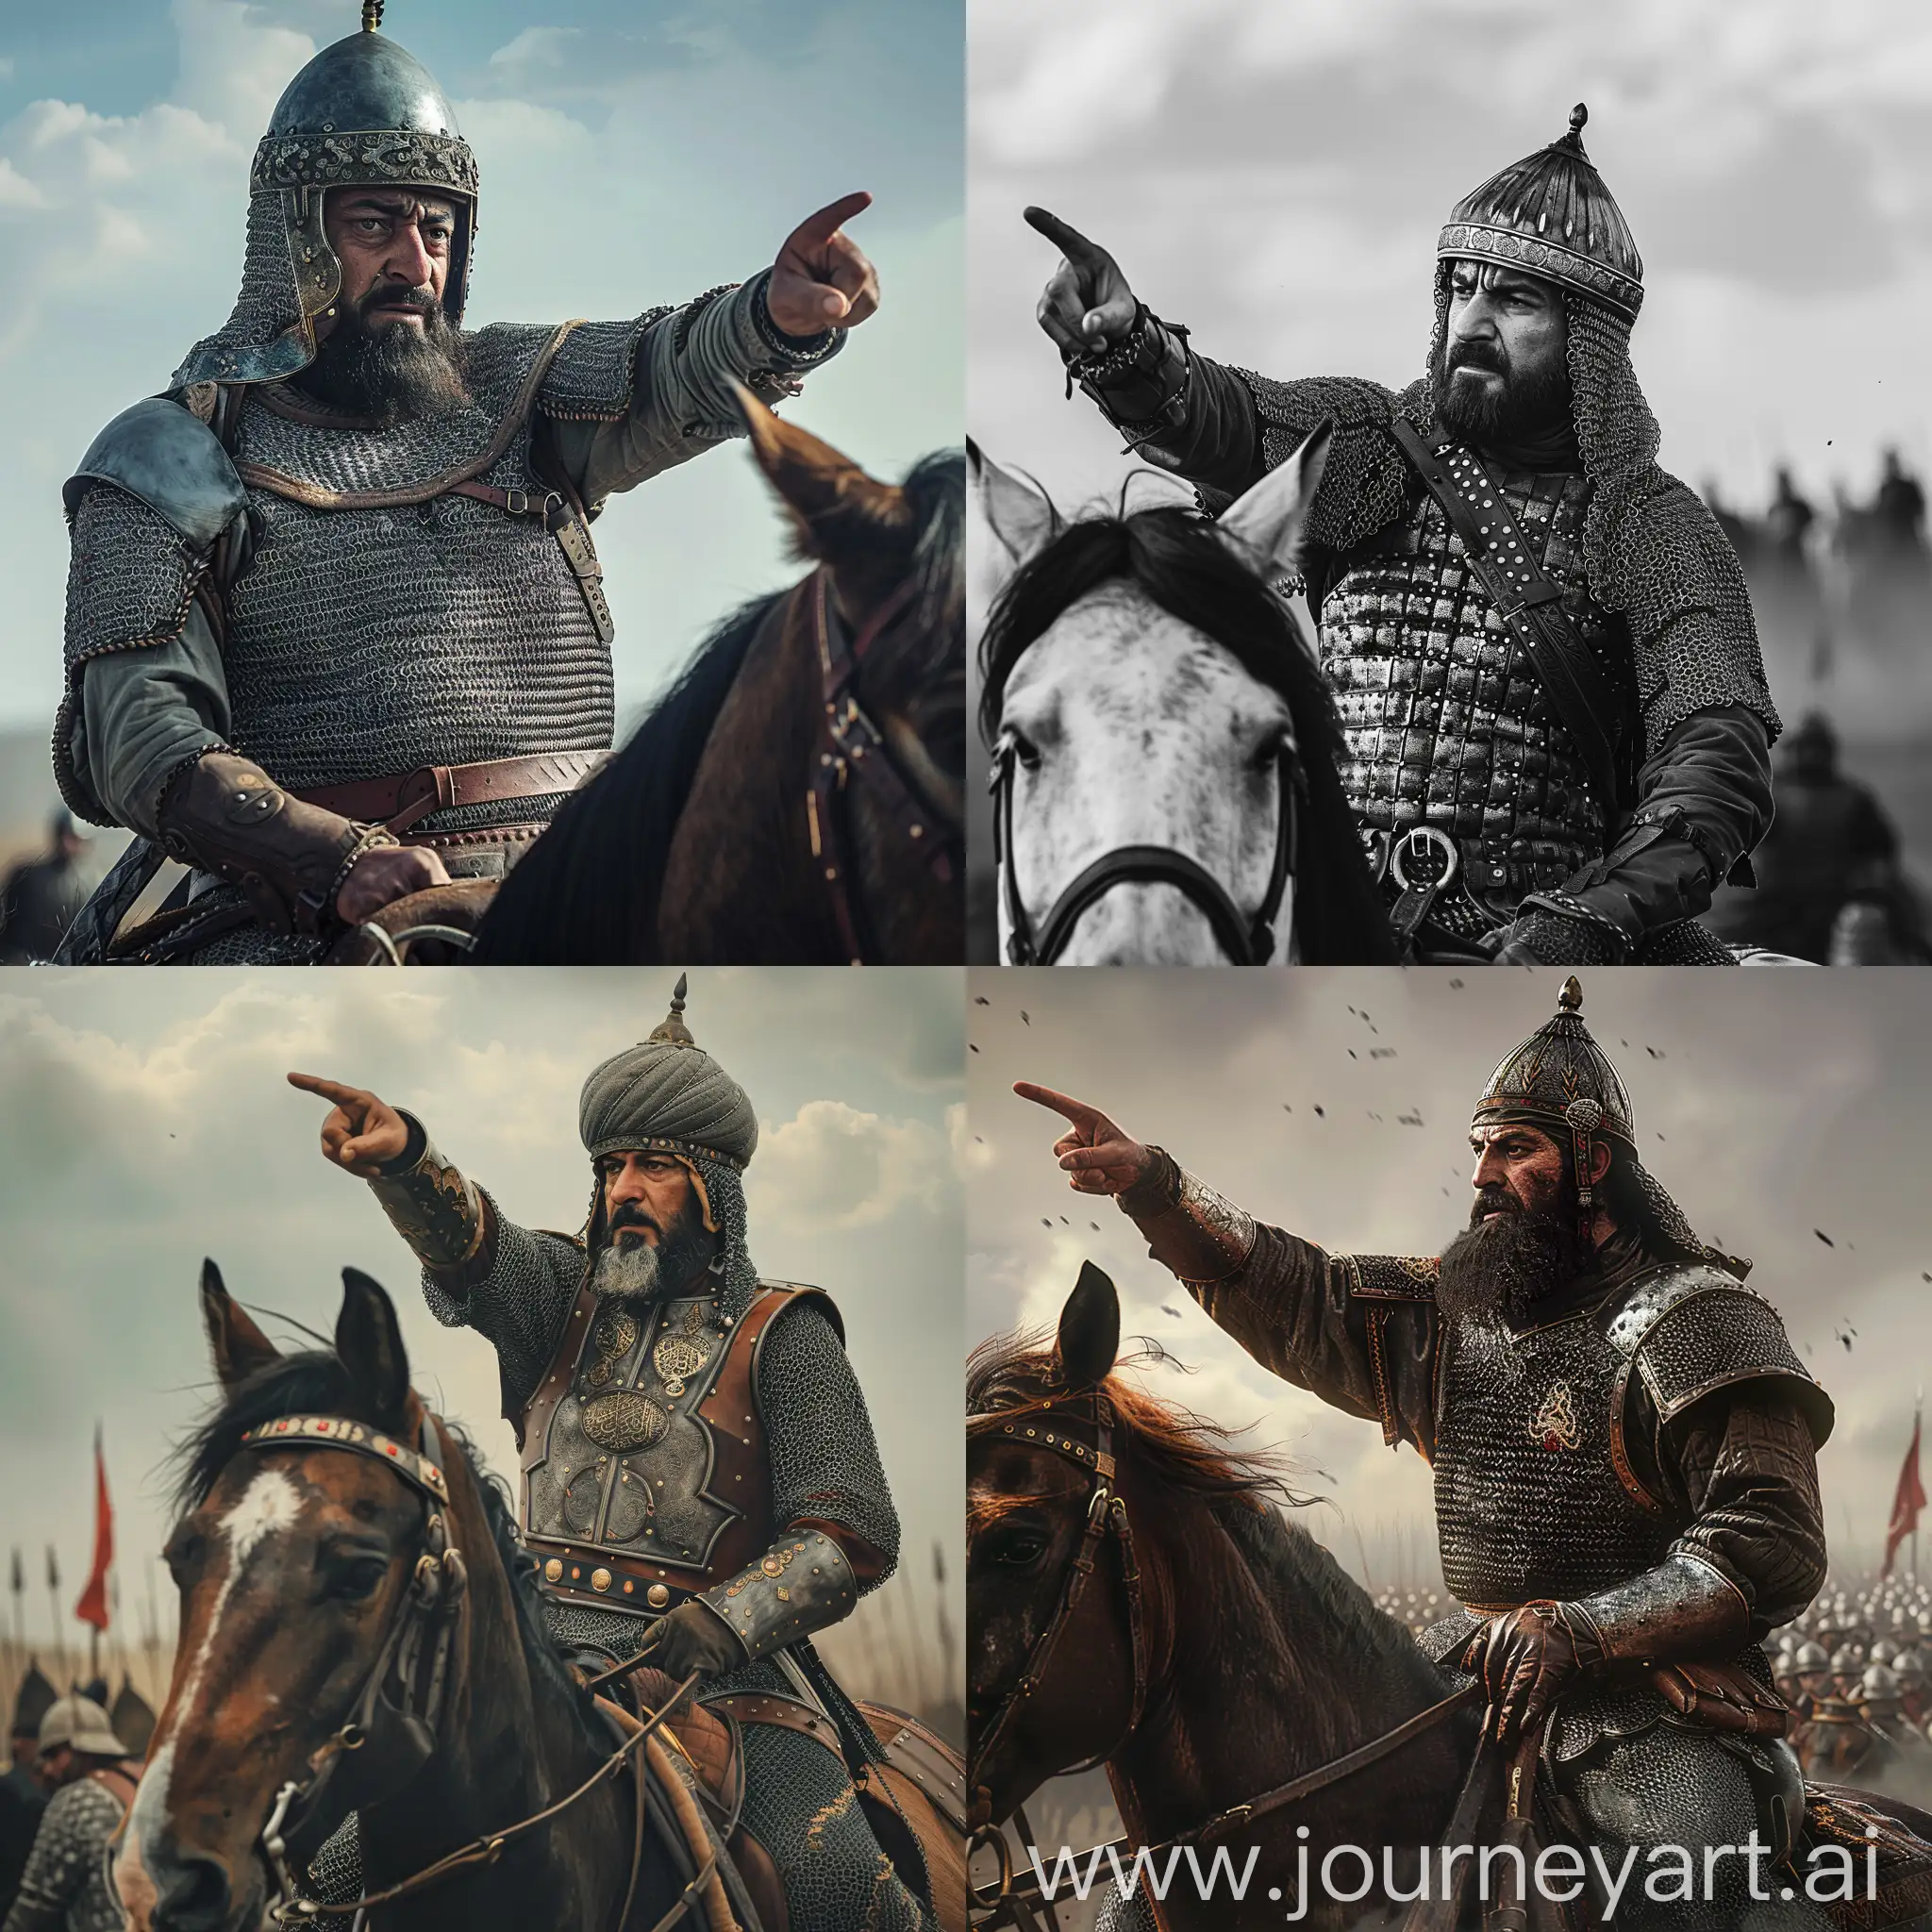 Ottoman-Sultan-Mehmed-the-Conqueror-in-Chainmail-Armor-Points-Strategically